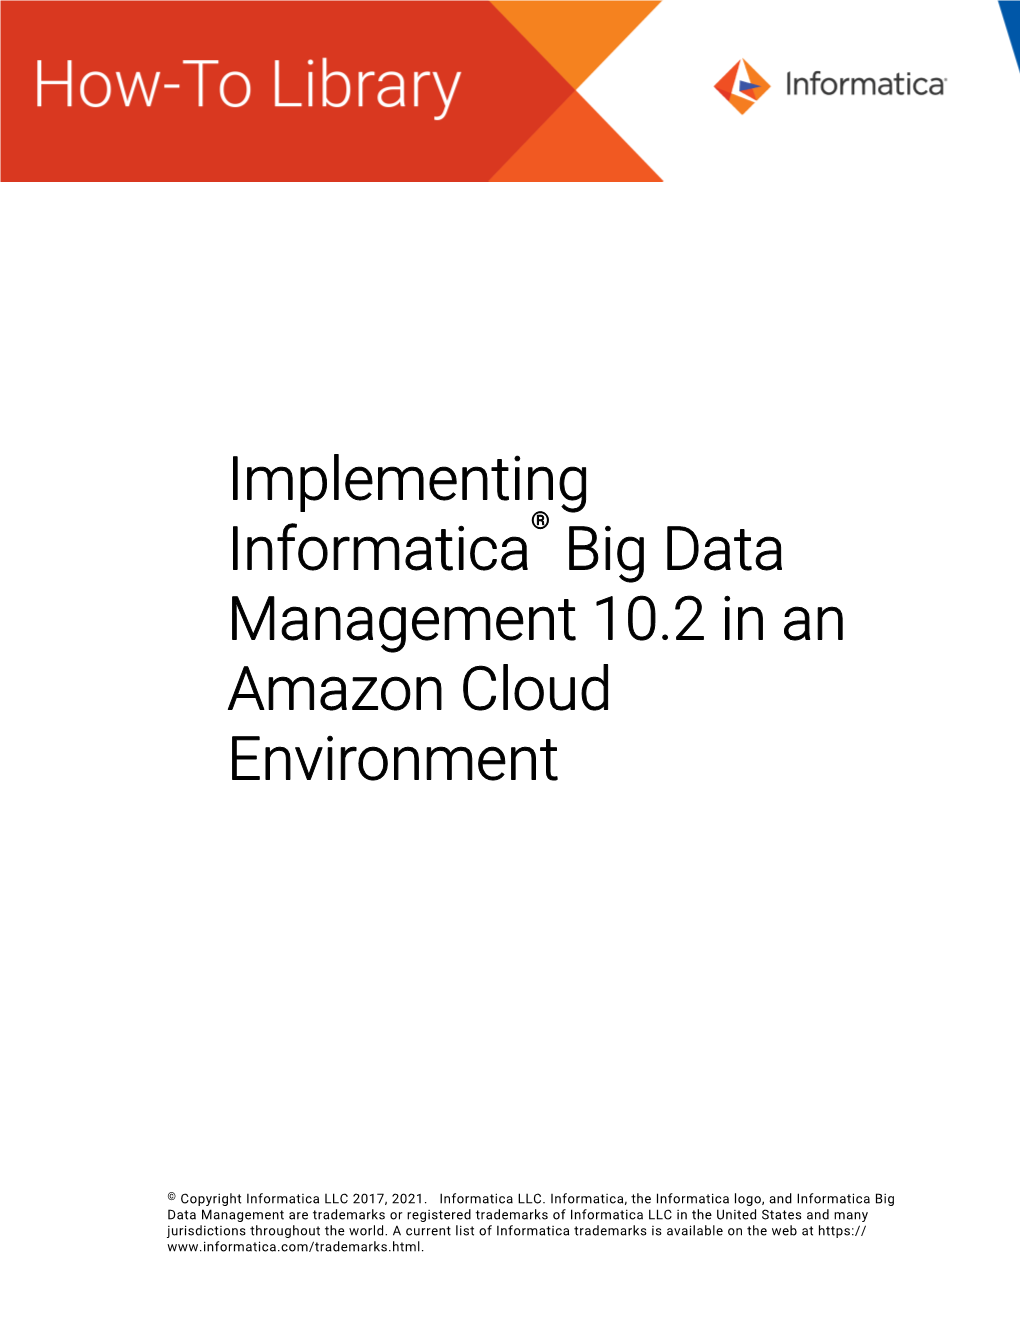 Implementing Informatica® Big Data Management 10.2 in an Amazon